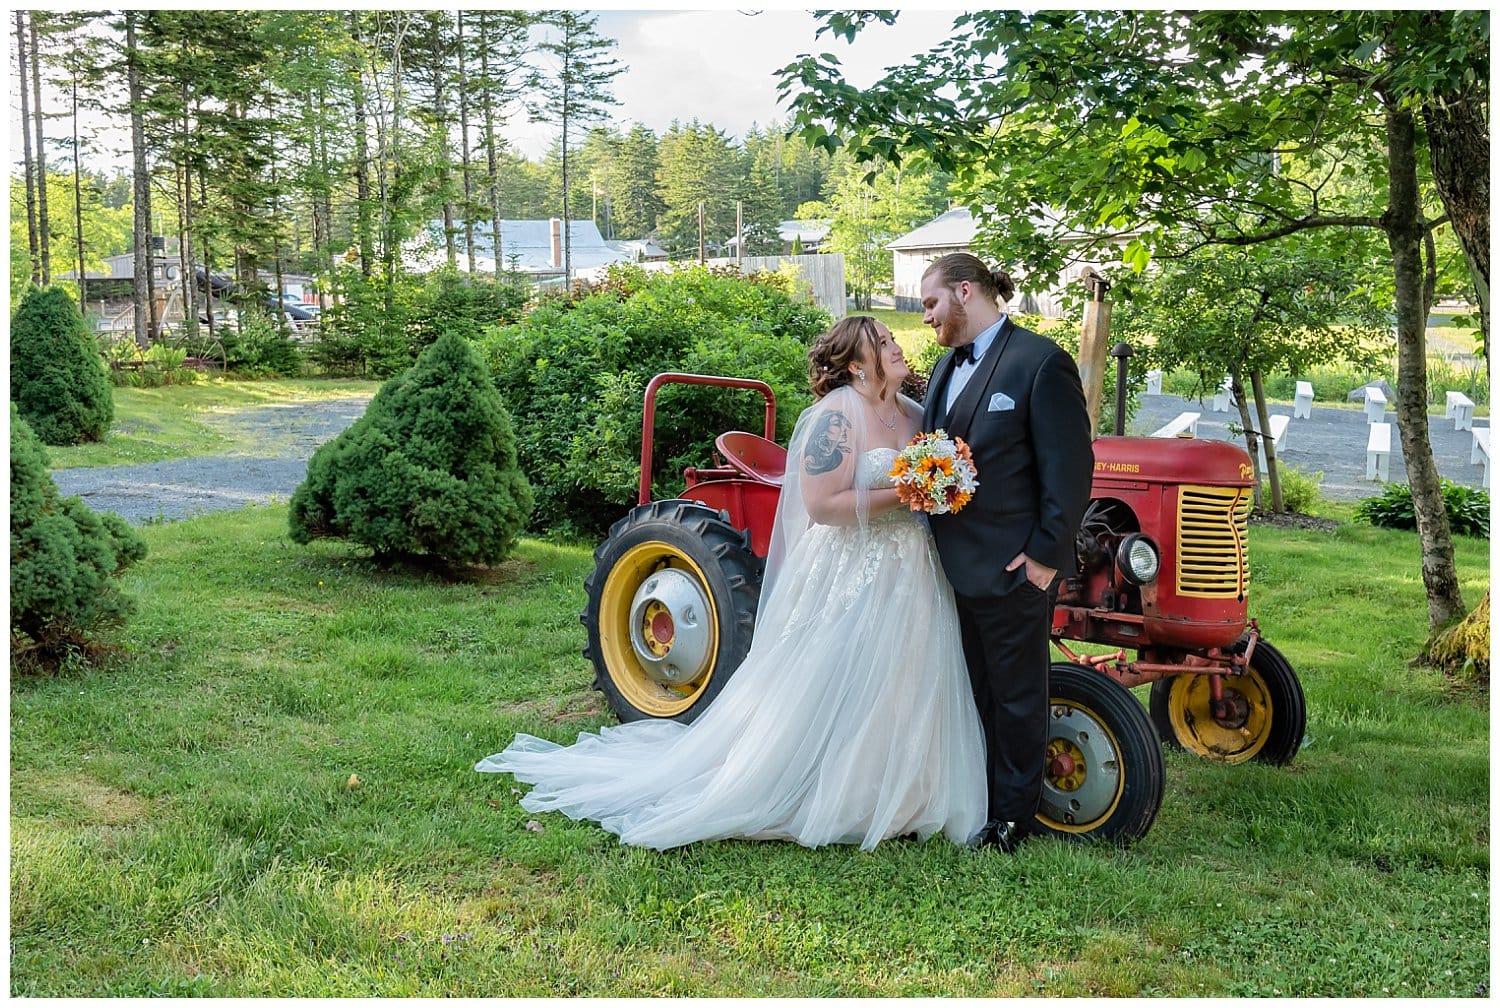 The bride and groom pose for wedding photos in front of a rustic tractor during their wedding at Hatfield Farm in Halifax, NS.